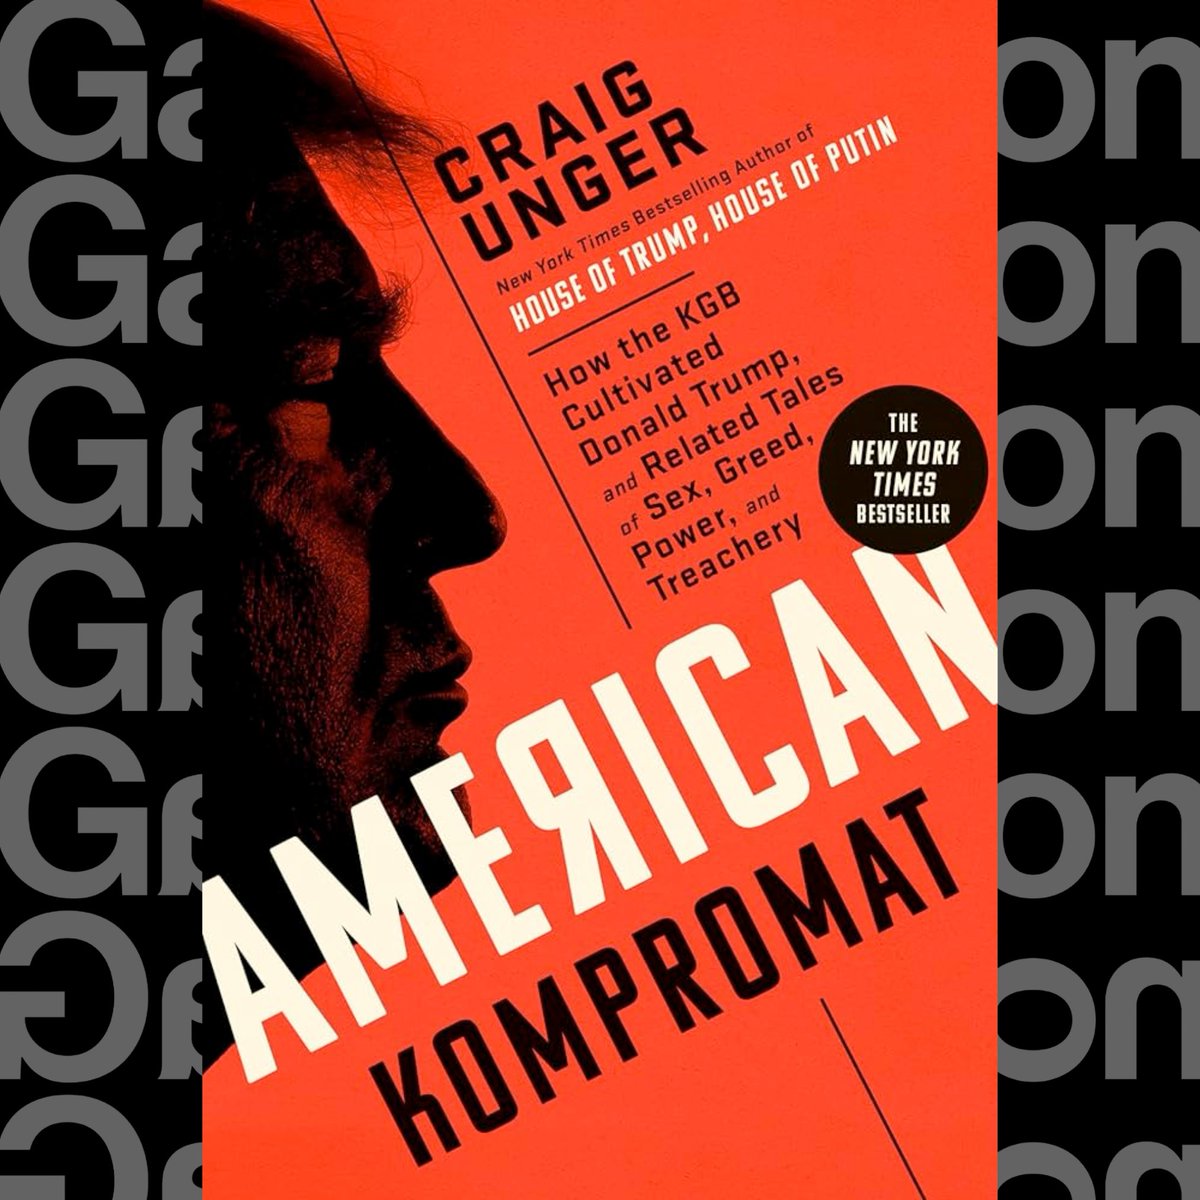 June 25th is George Orwell’s birthday! Come celebrate with us at a live taping of Gaslit Nation, featuring another fearless journalist, Craig Unger, the author of several bestselling books: House of Trump, House of Putin; House of Bush, House of Saud; and American Kompromat: